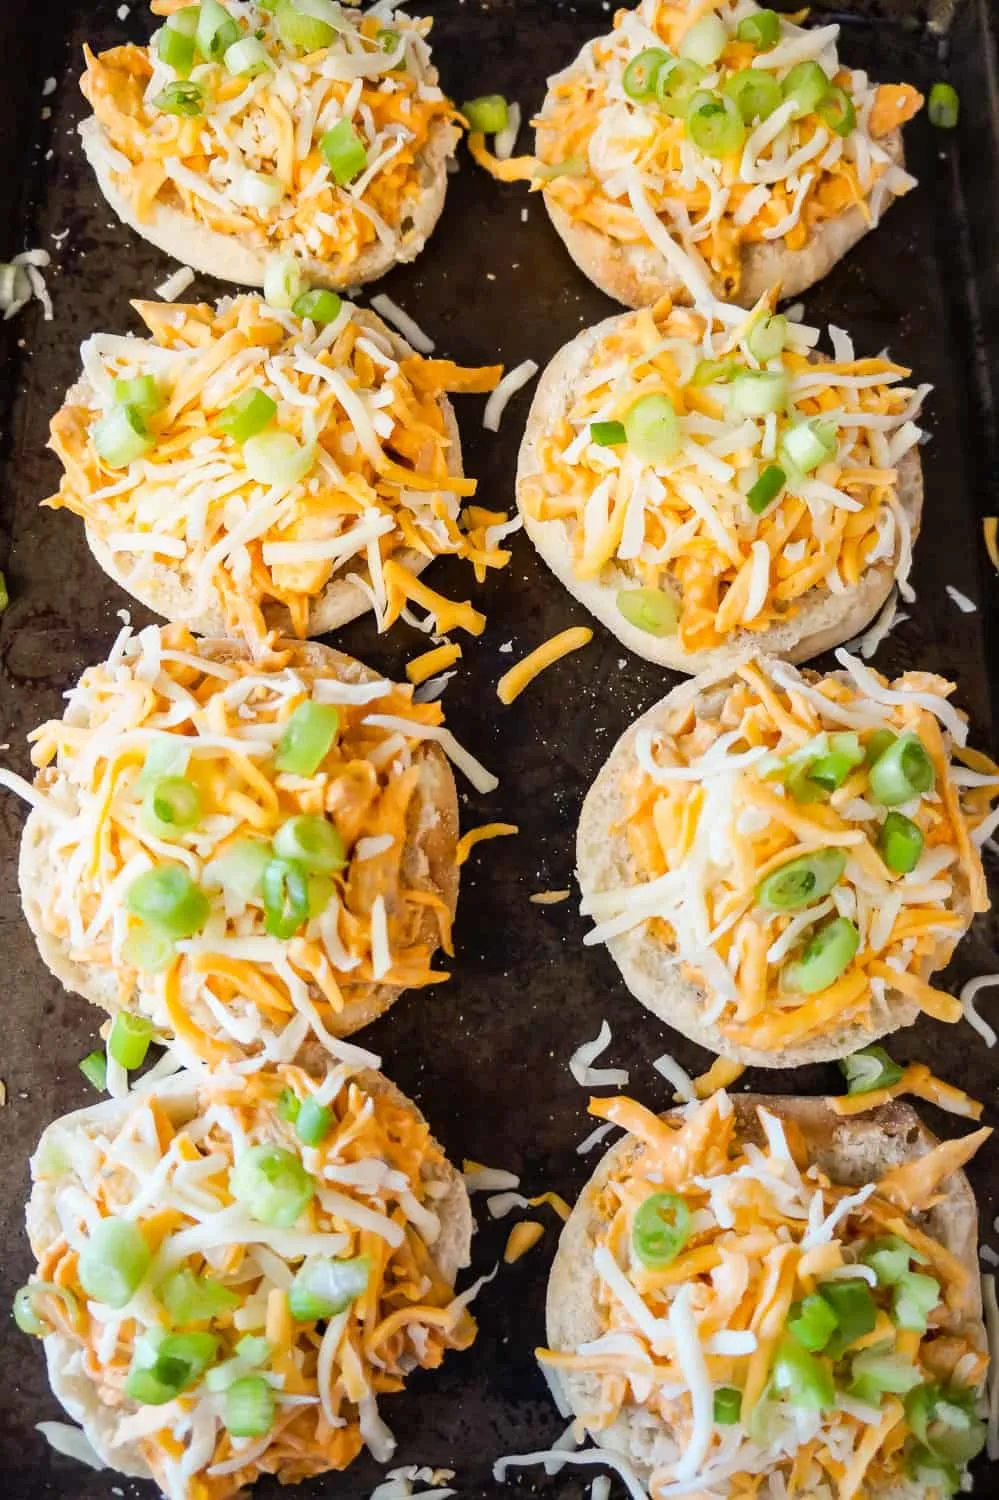 Buffalo chicken English Muffins topped with shredded cheese before baking